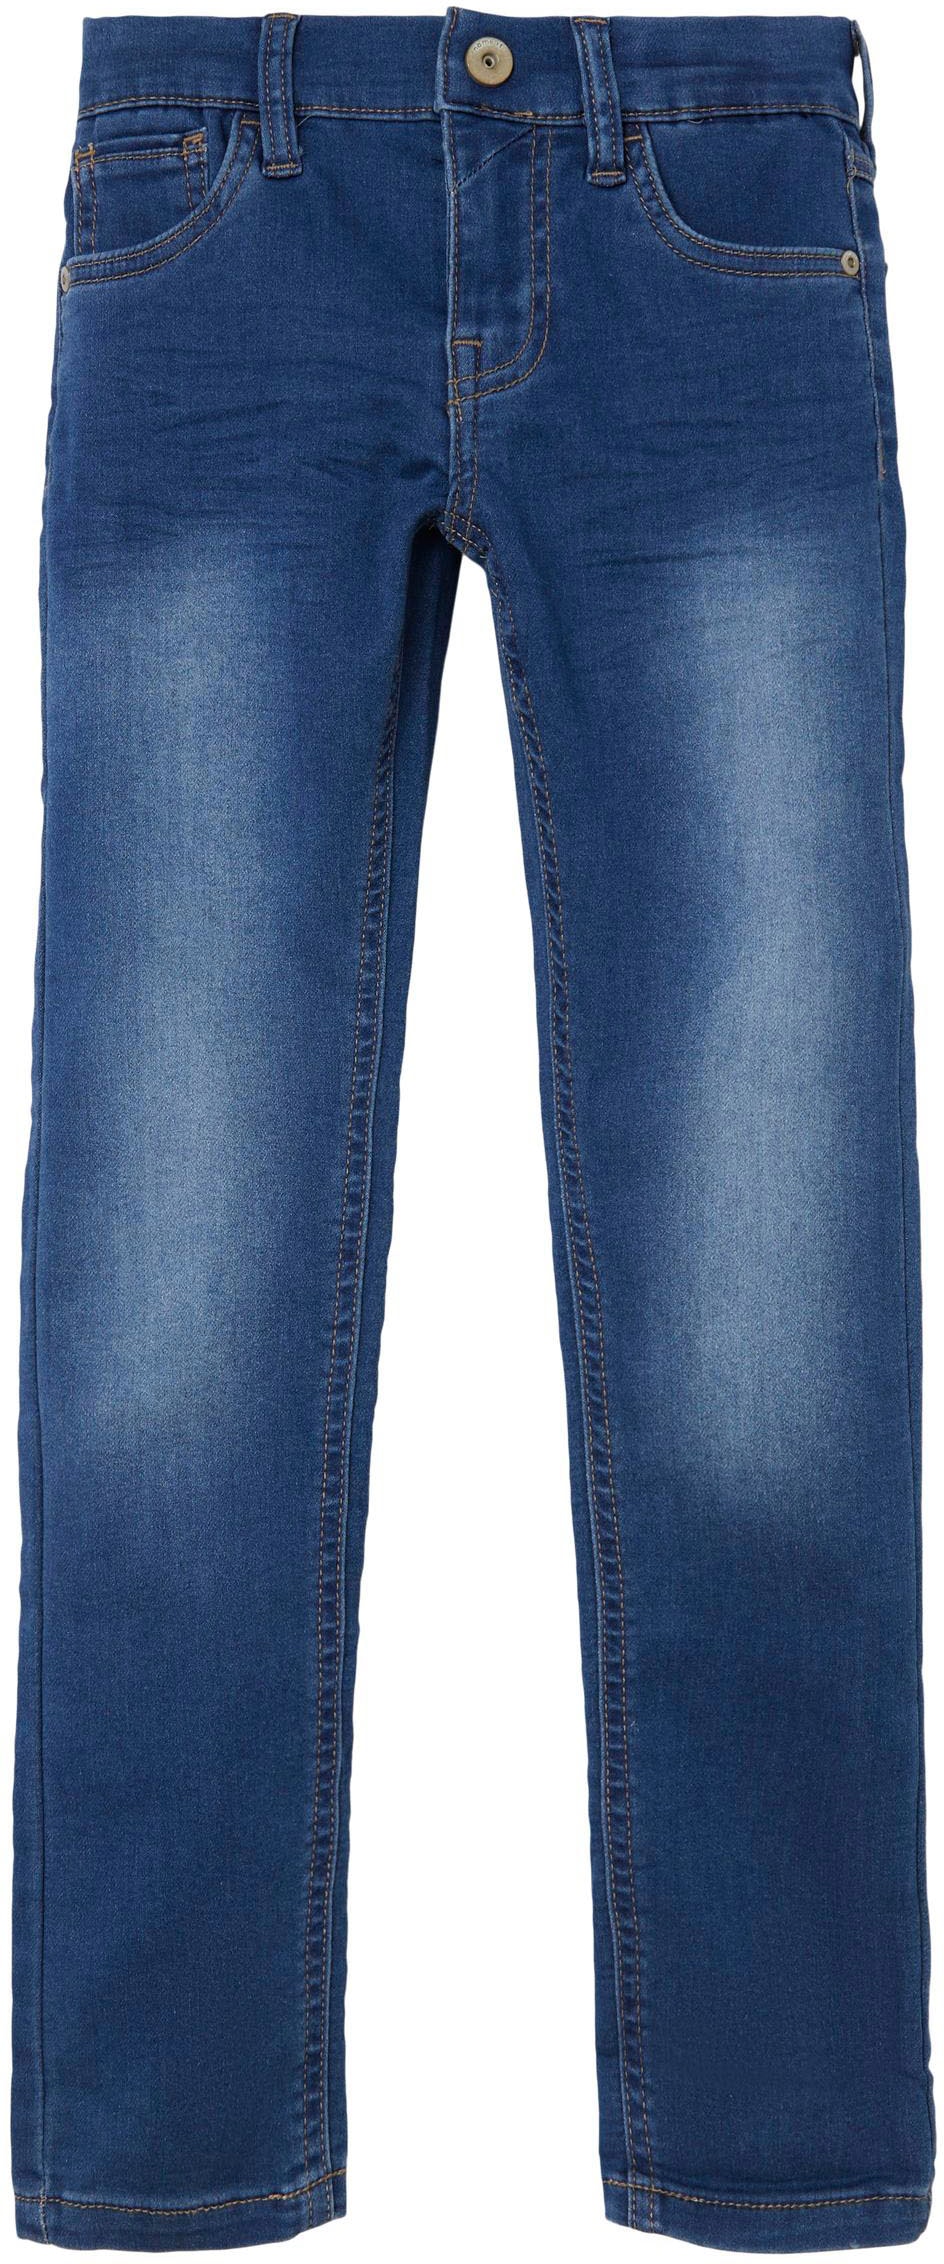 Stretch-Jeans COR1 DNMTHAYER SWE online PANT« It bei Name »NKMTHEO